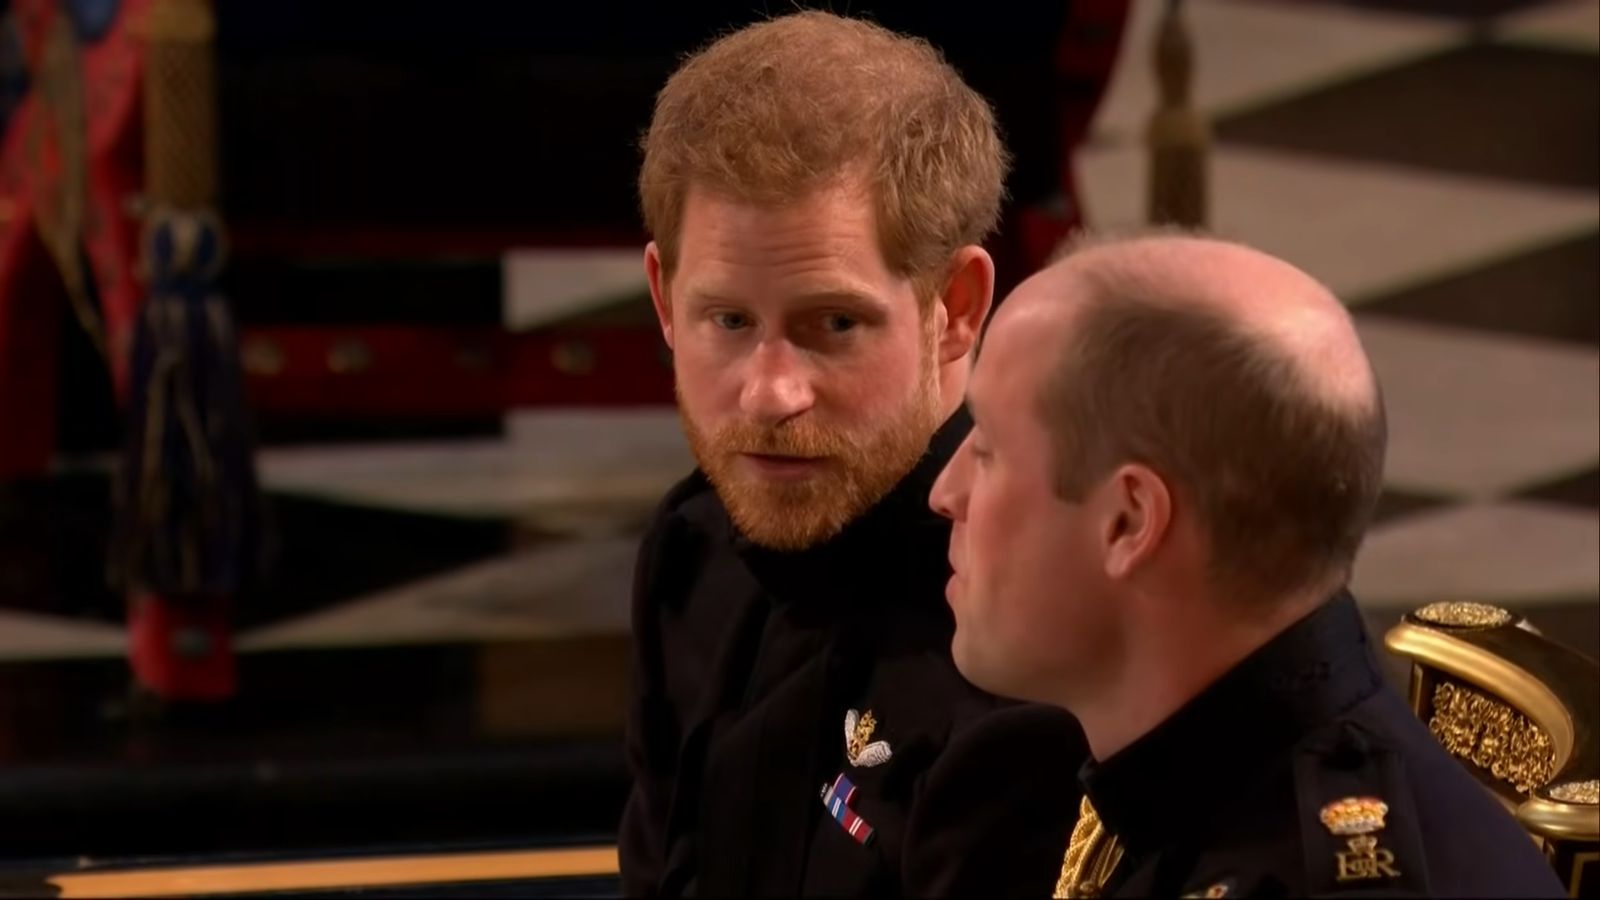 prince-william-prince-harry-lacked-connection-during-their-recent-walkabout-prince-of-wales-worried-about-prince-harry-but-healing-their-rift-is-not-his-priority-source-claims